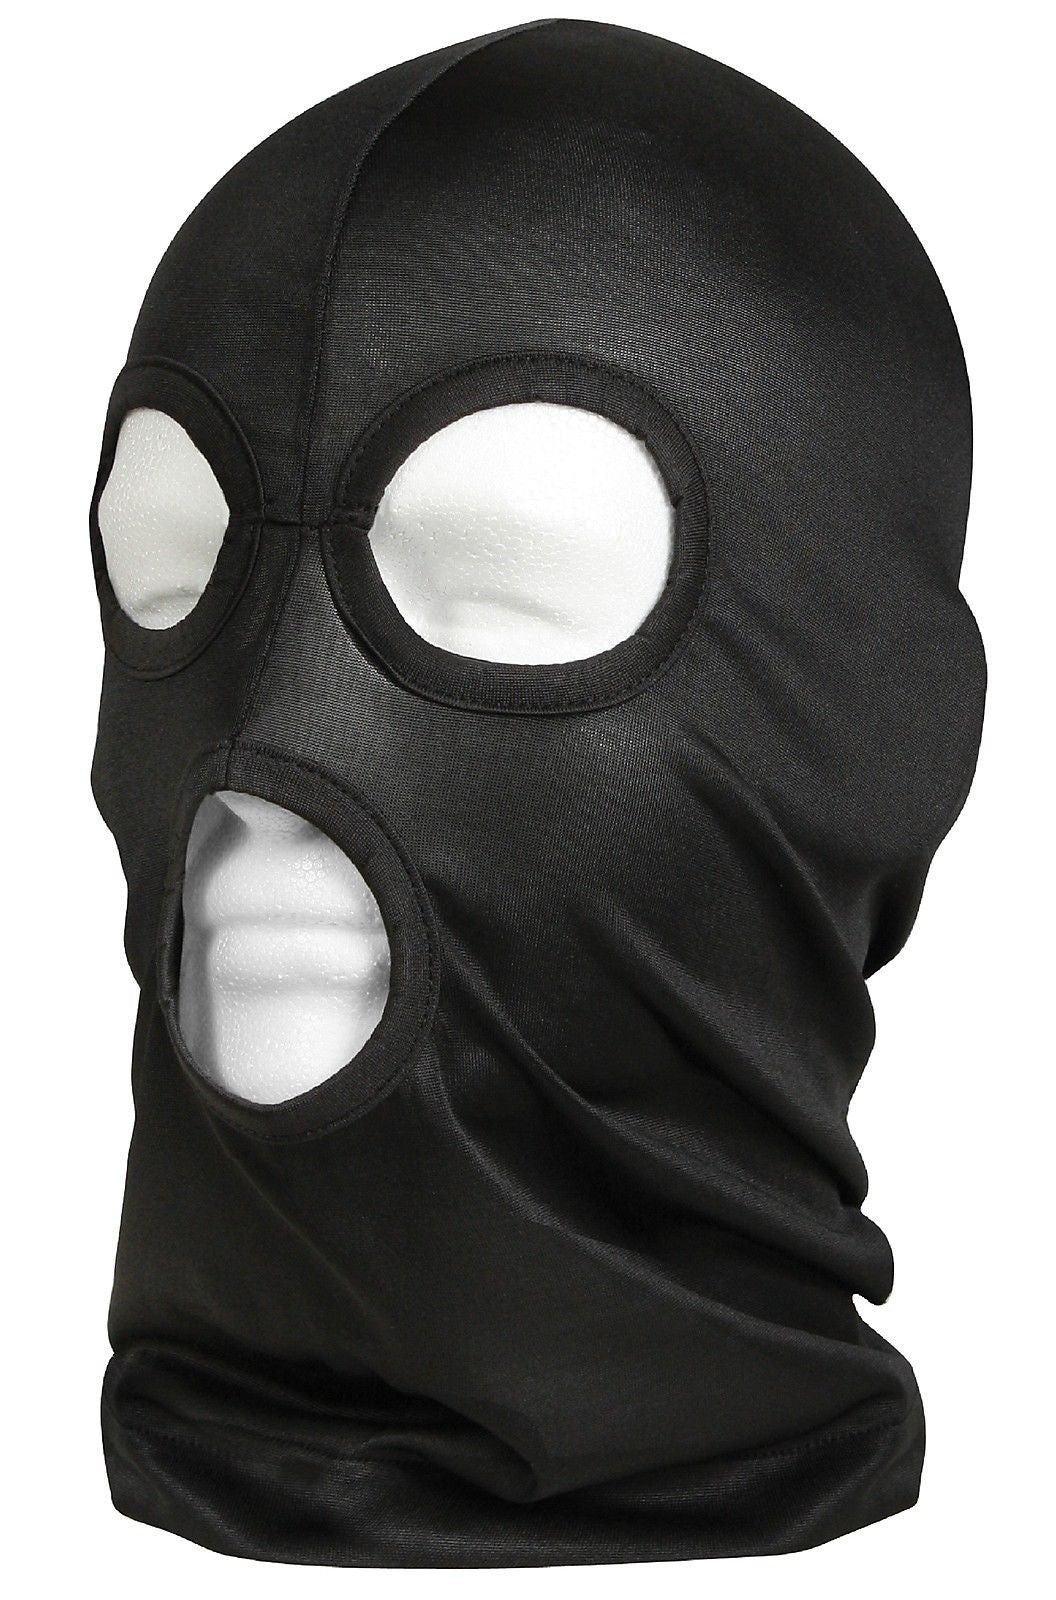 Black Lightweight 3 Hole Face Mask for Cold Winter Head